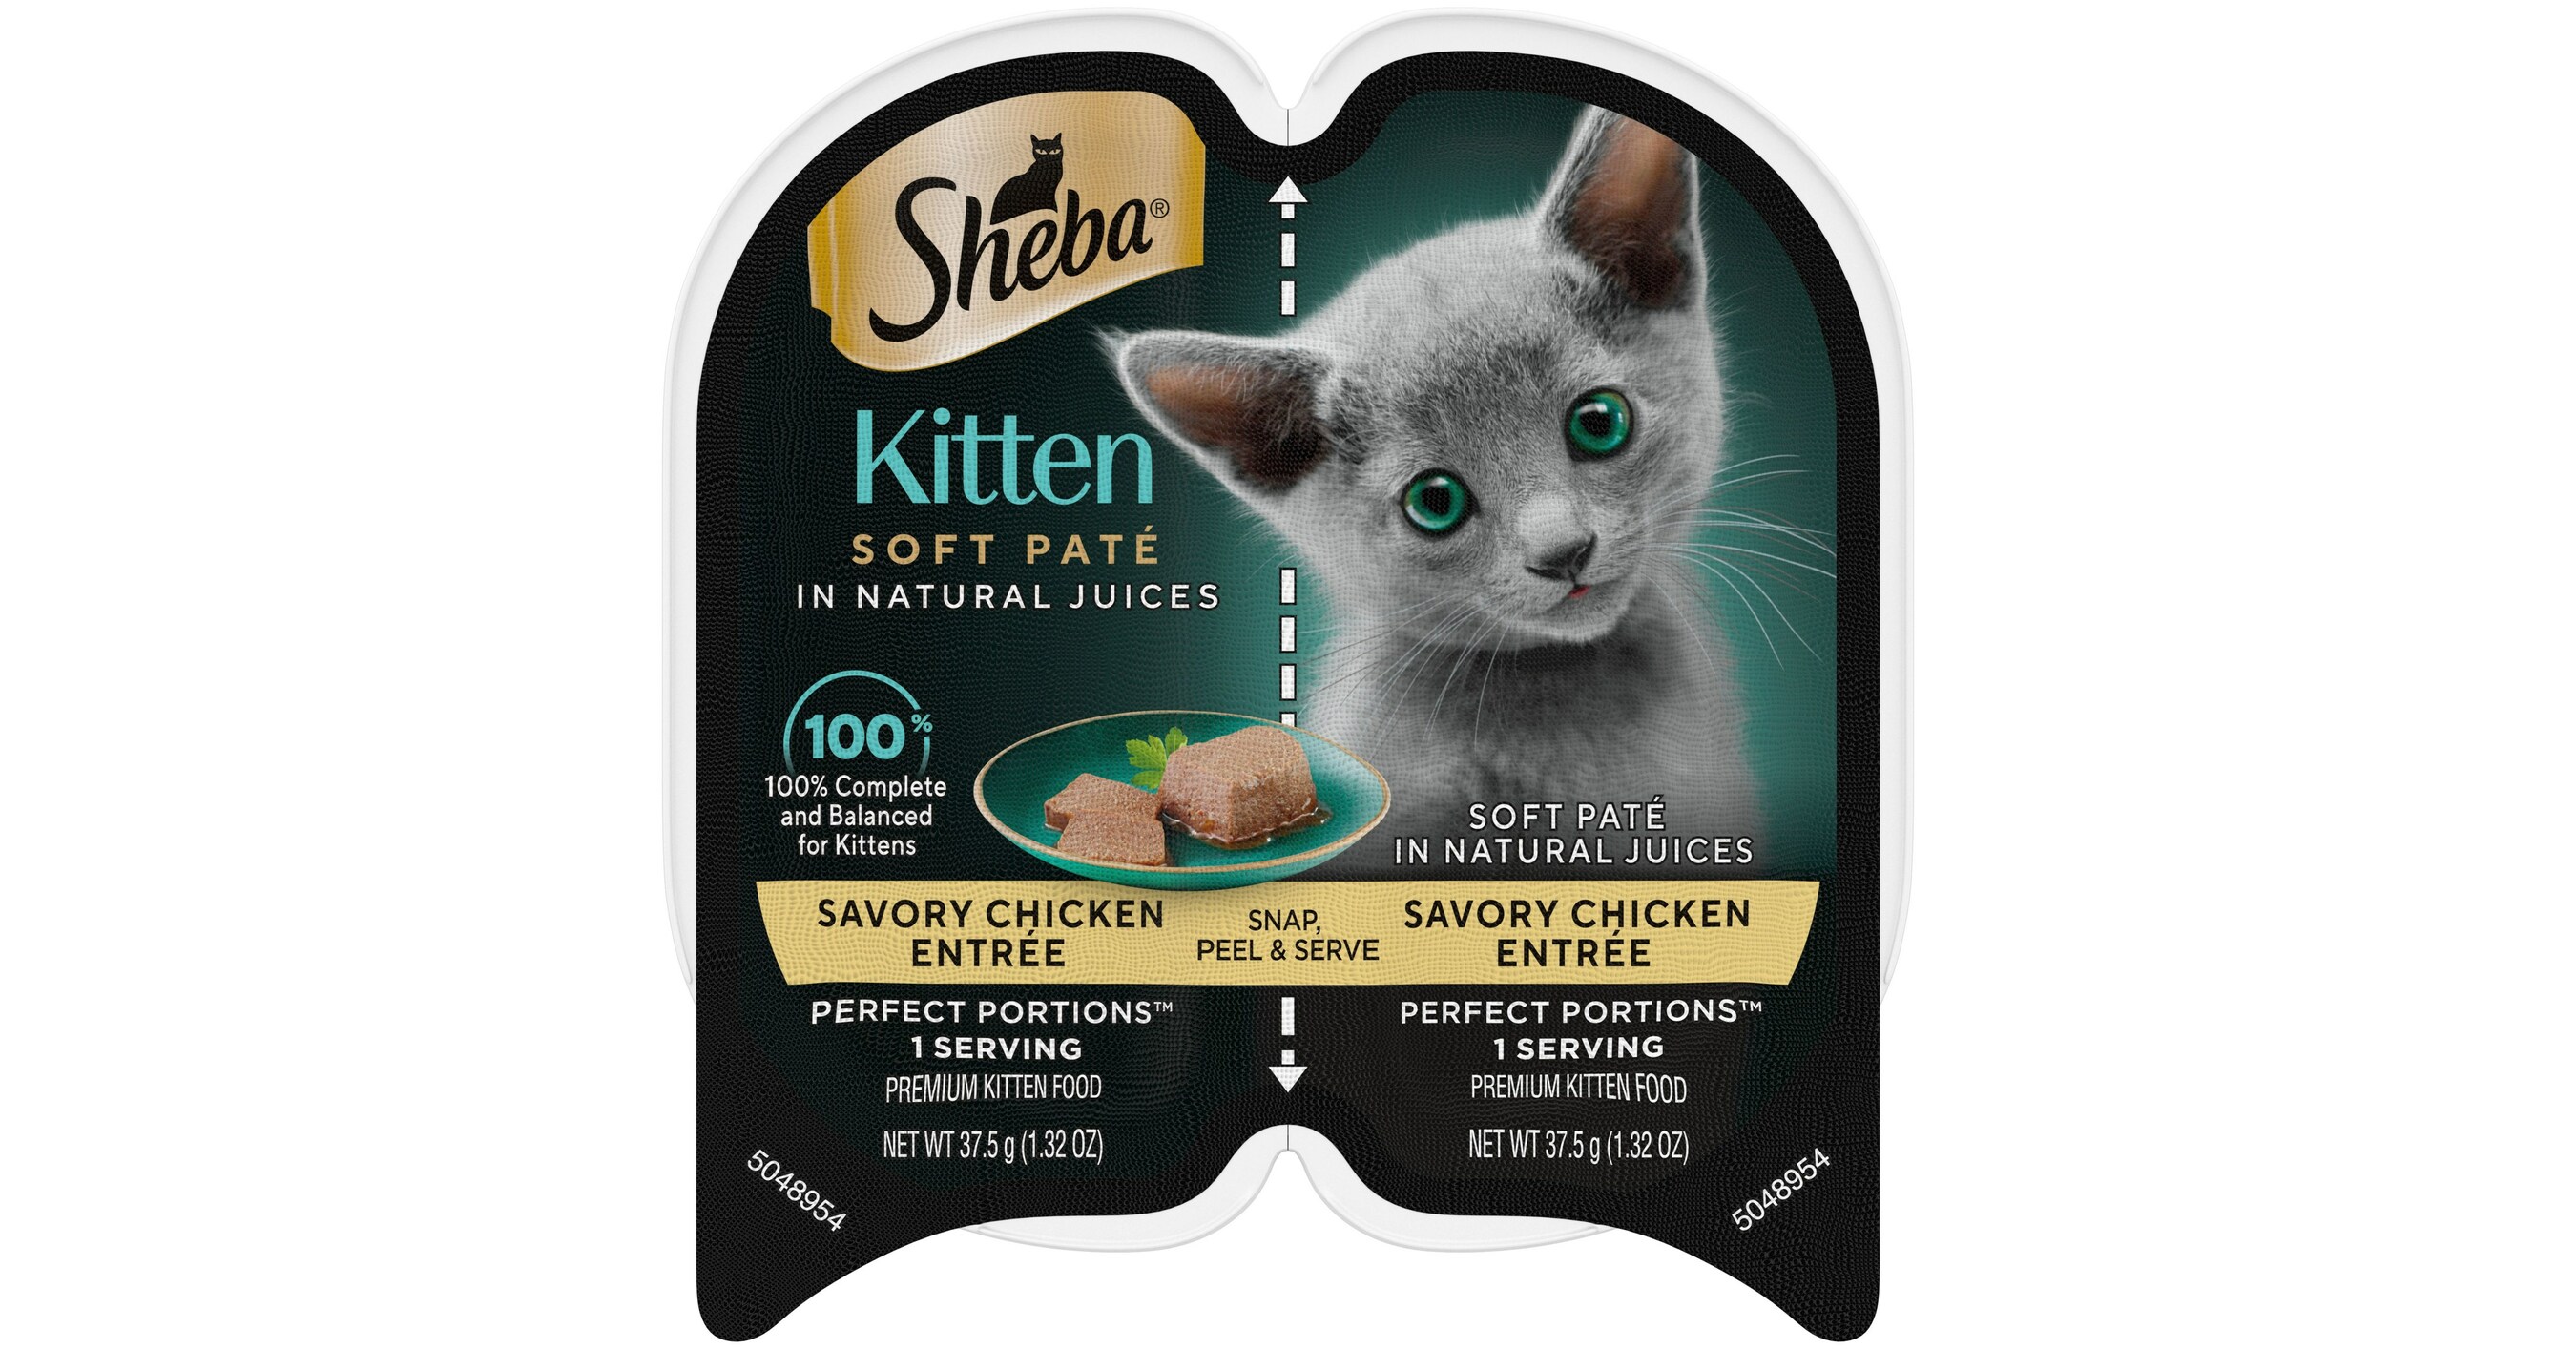 NEW RESEARCH FROM THE SHEBA® BRAND CONFIRMS CAT PARENTS CAN'T